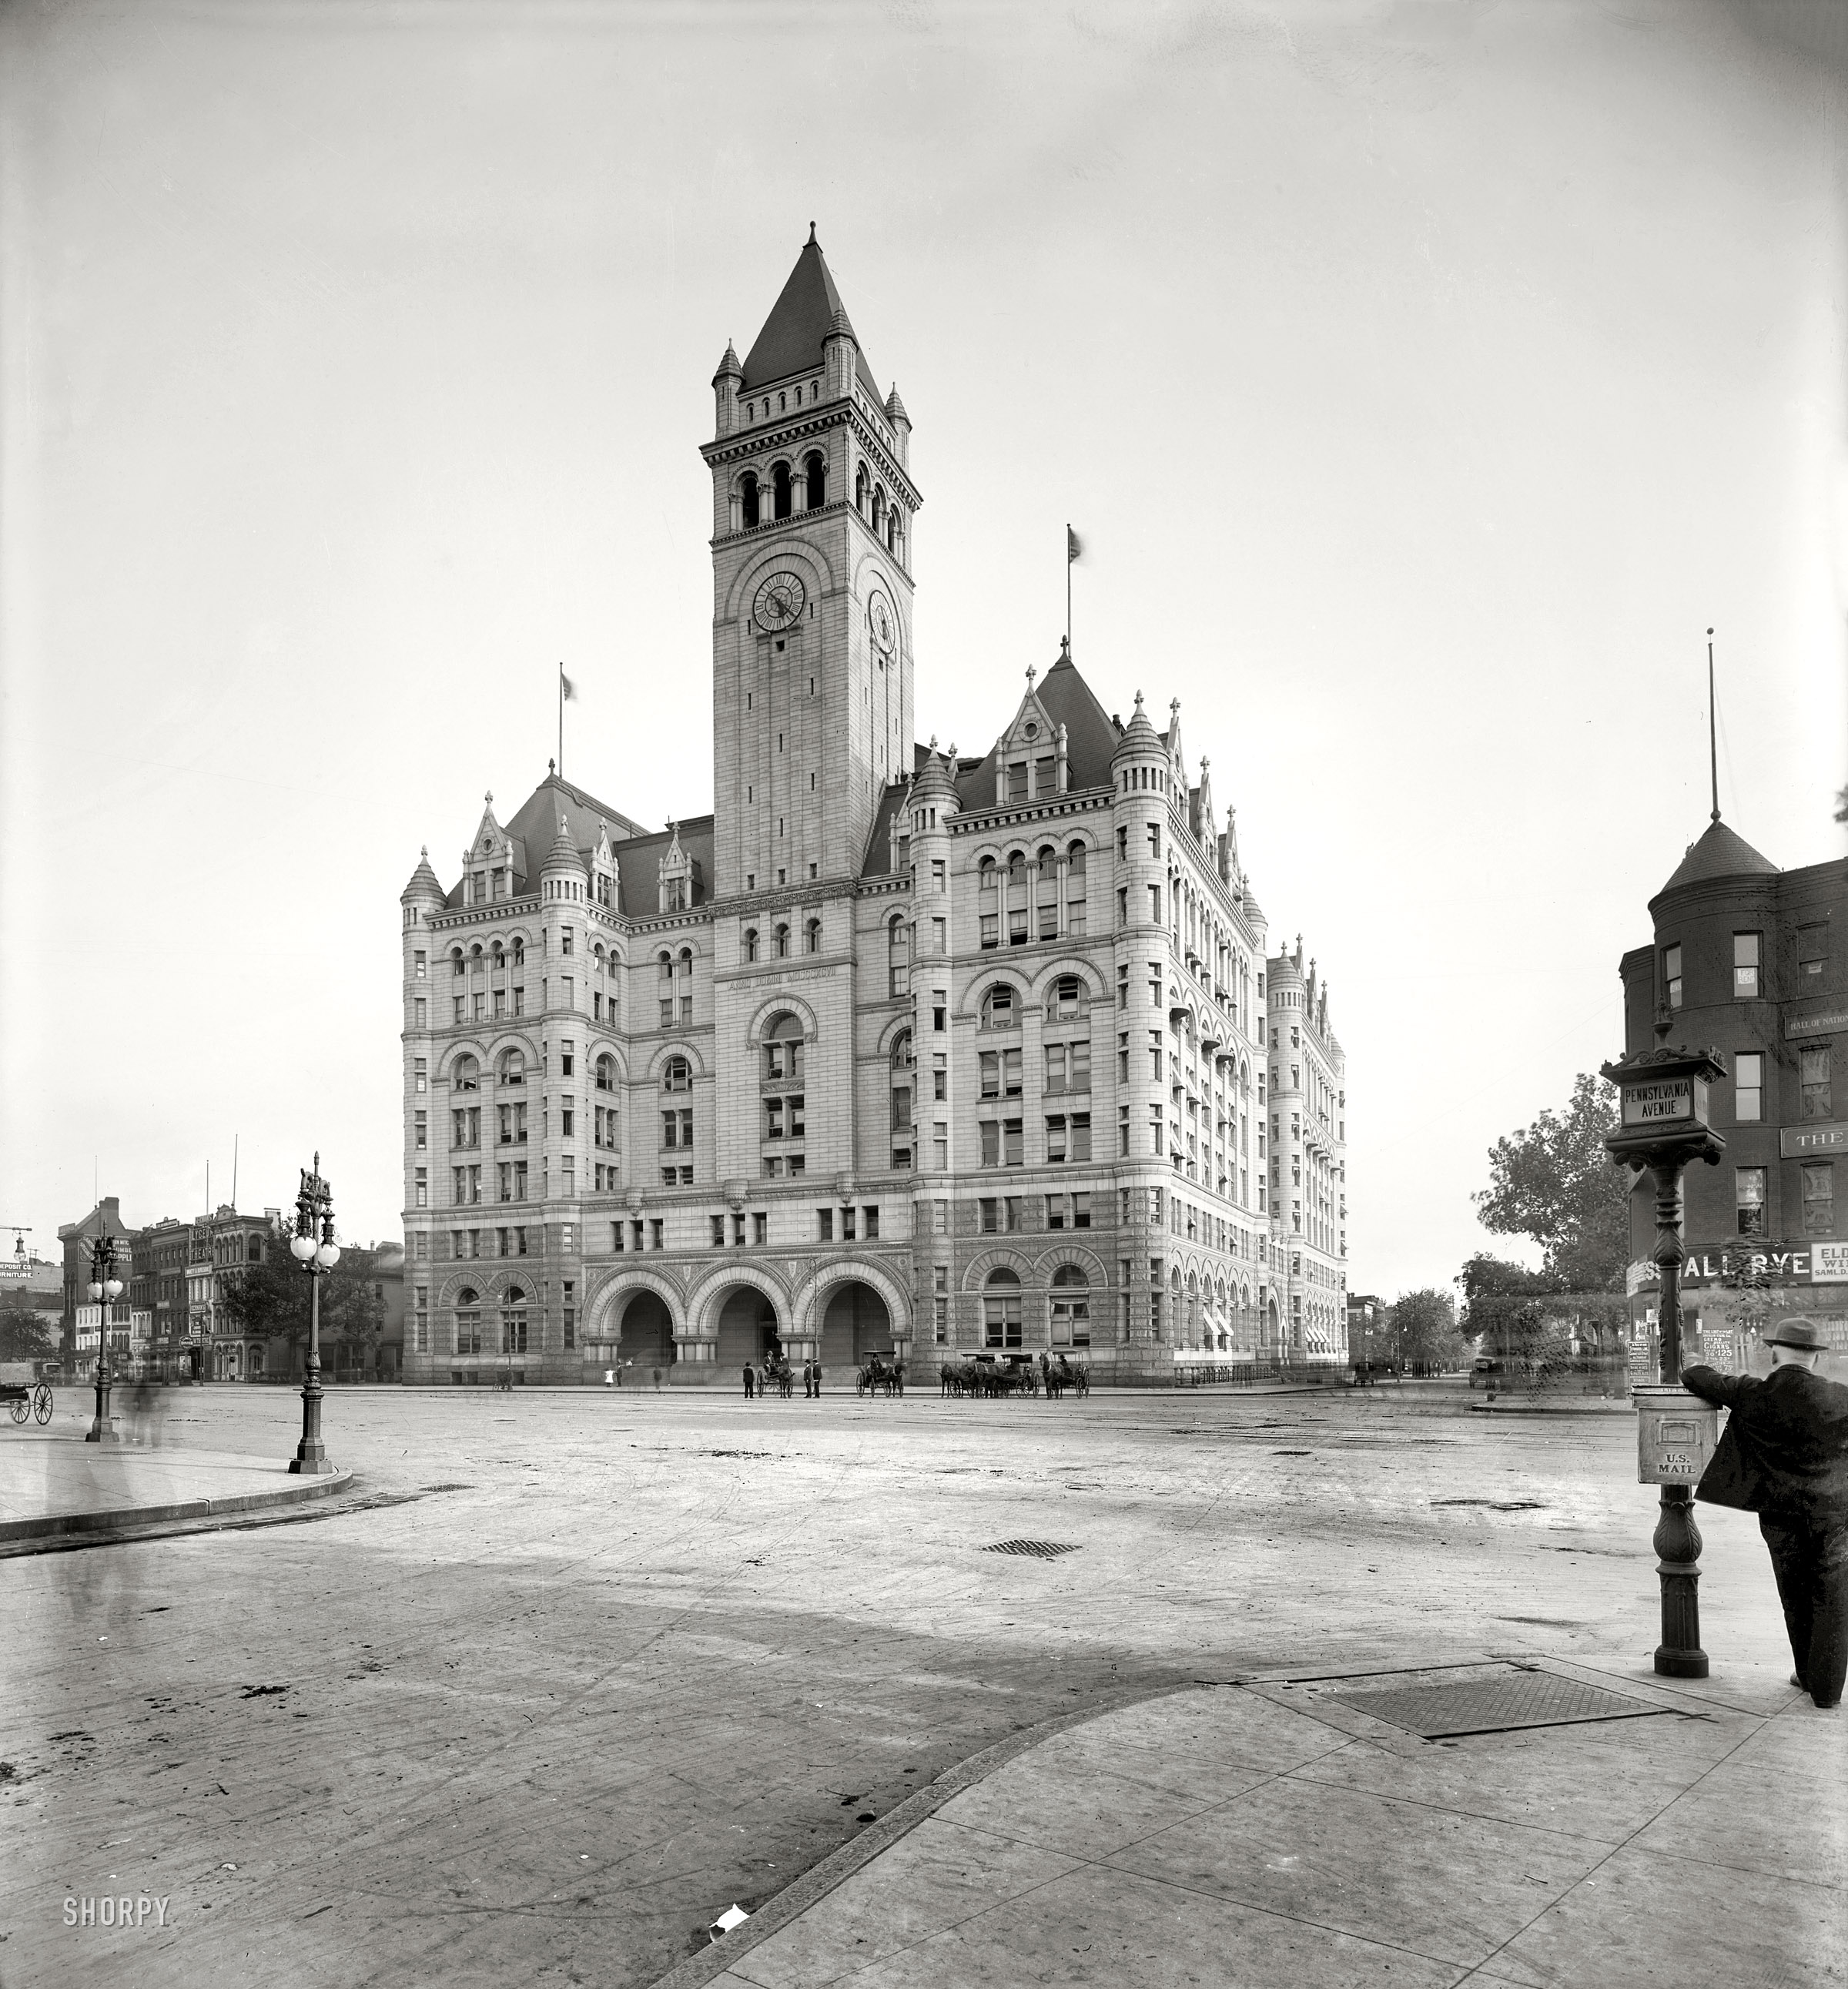 Washington, D.C., circa 1905. "P.O. Dept." The Old Post Office on Pennsylvania Avenue. National Photo Company Collection glass negative. View full size.